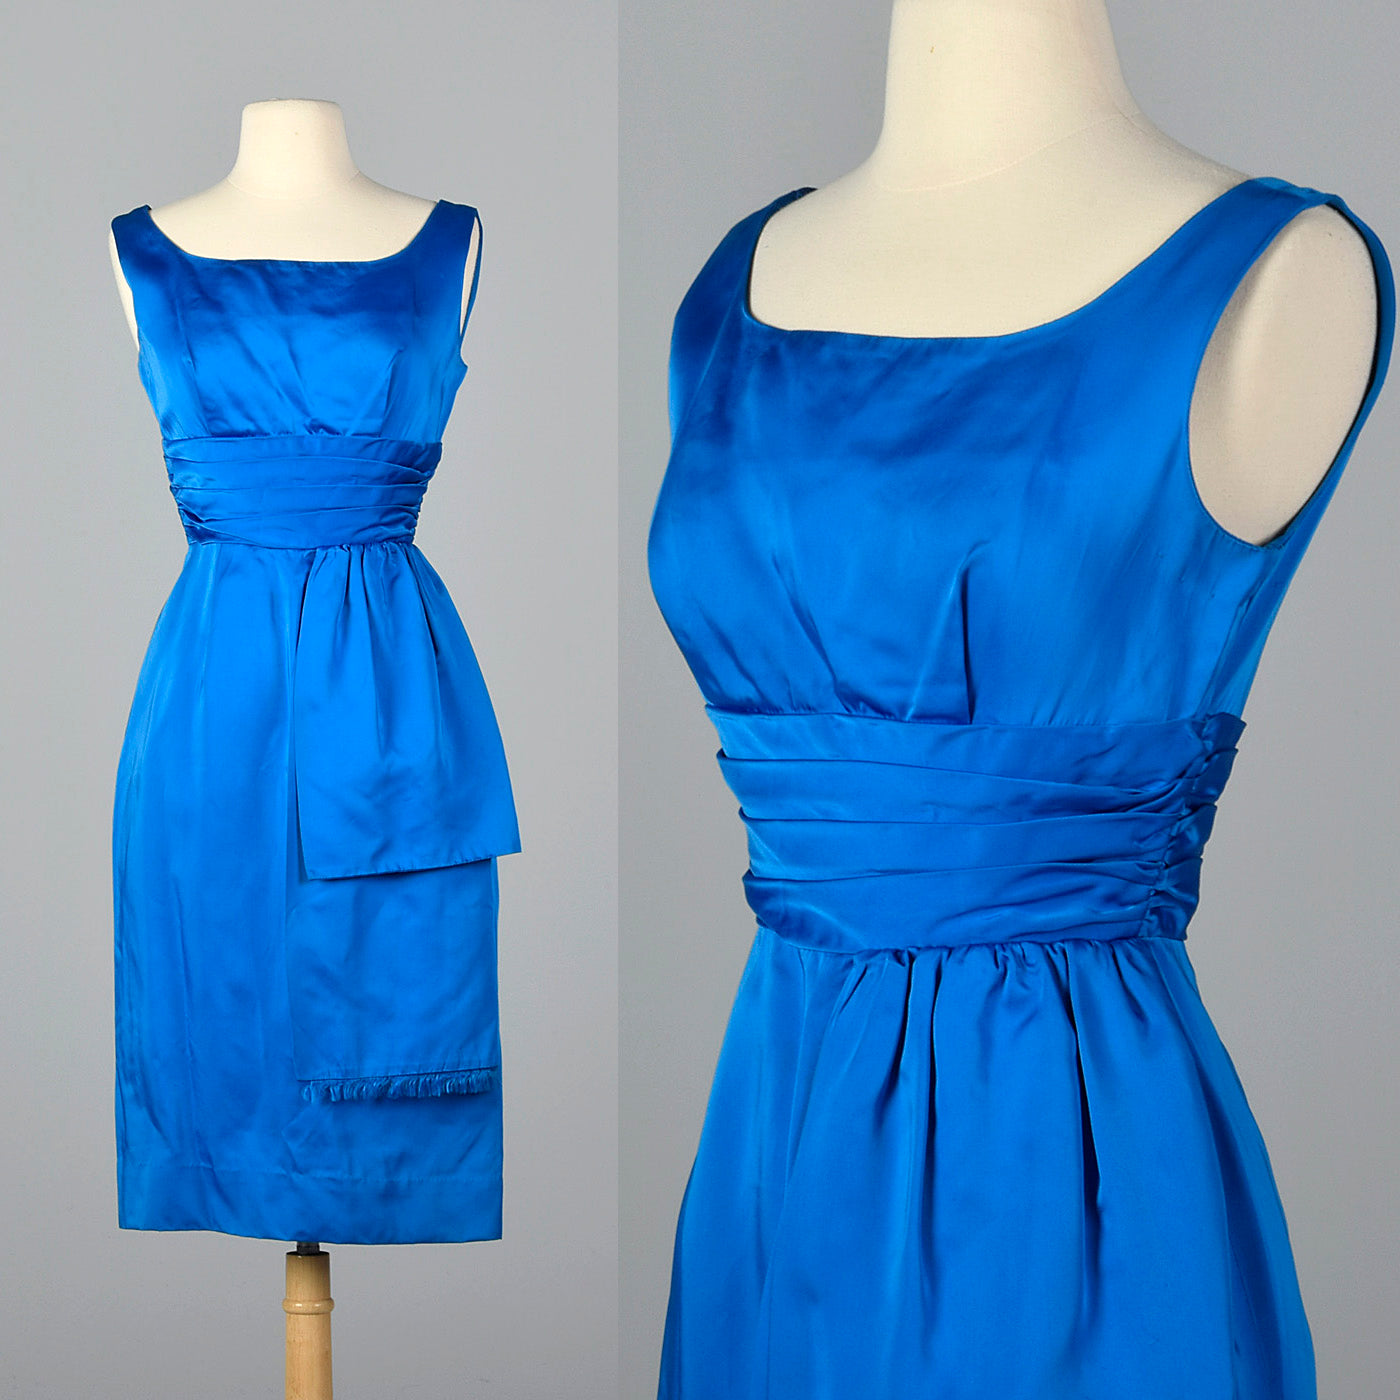 1950s Electric Blue Pencil Dress with Hip Sash